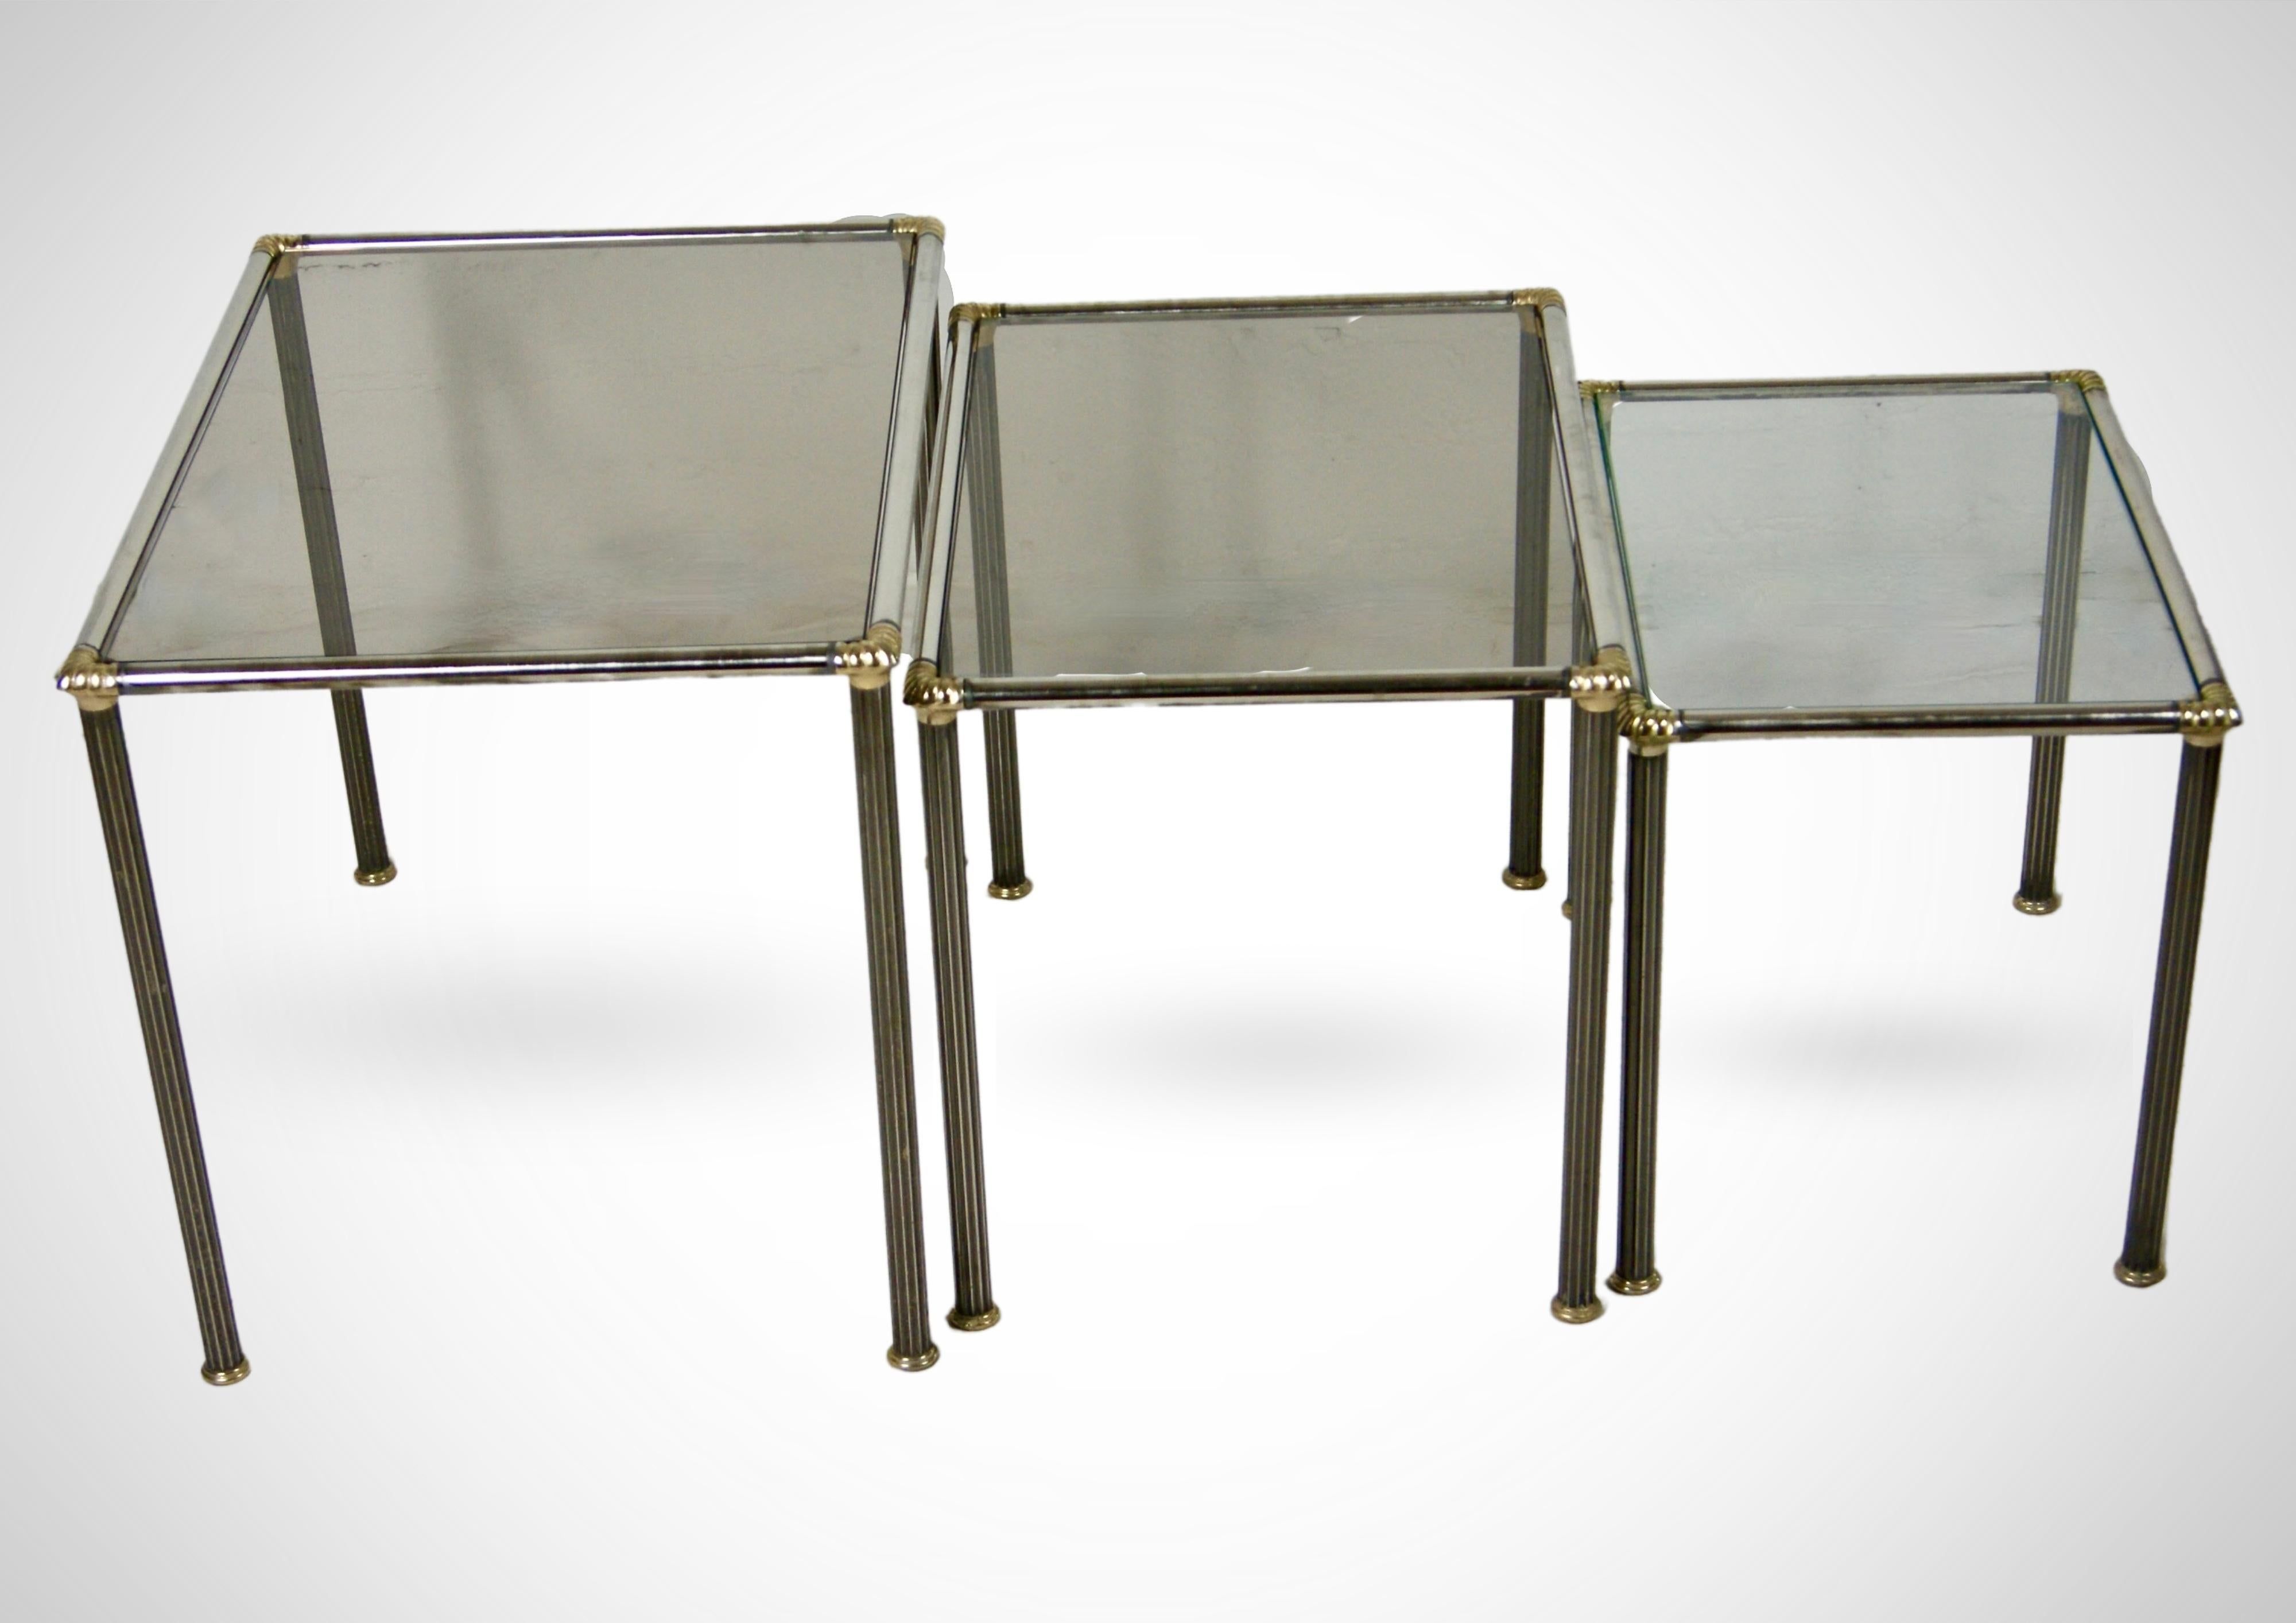 Vintage trio of nesting tables. 
In the manner of Maison Charles France, circa 1970s.

Made of polished steel with brass toned corners.
The legs have a ribbed surface and real brass caped feet.
The tables have smoked glass top
 
In very good vintage